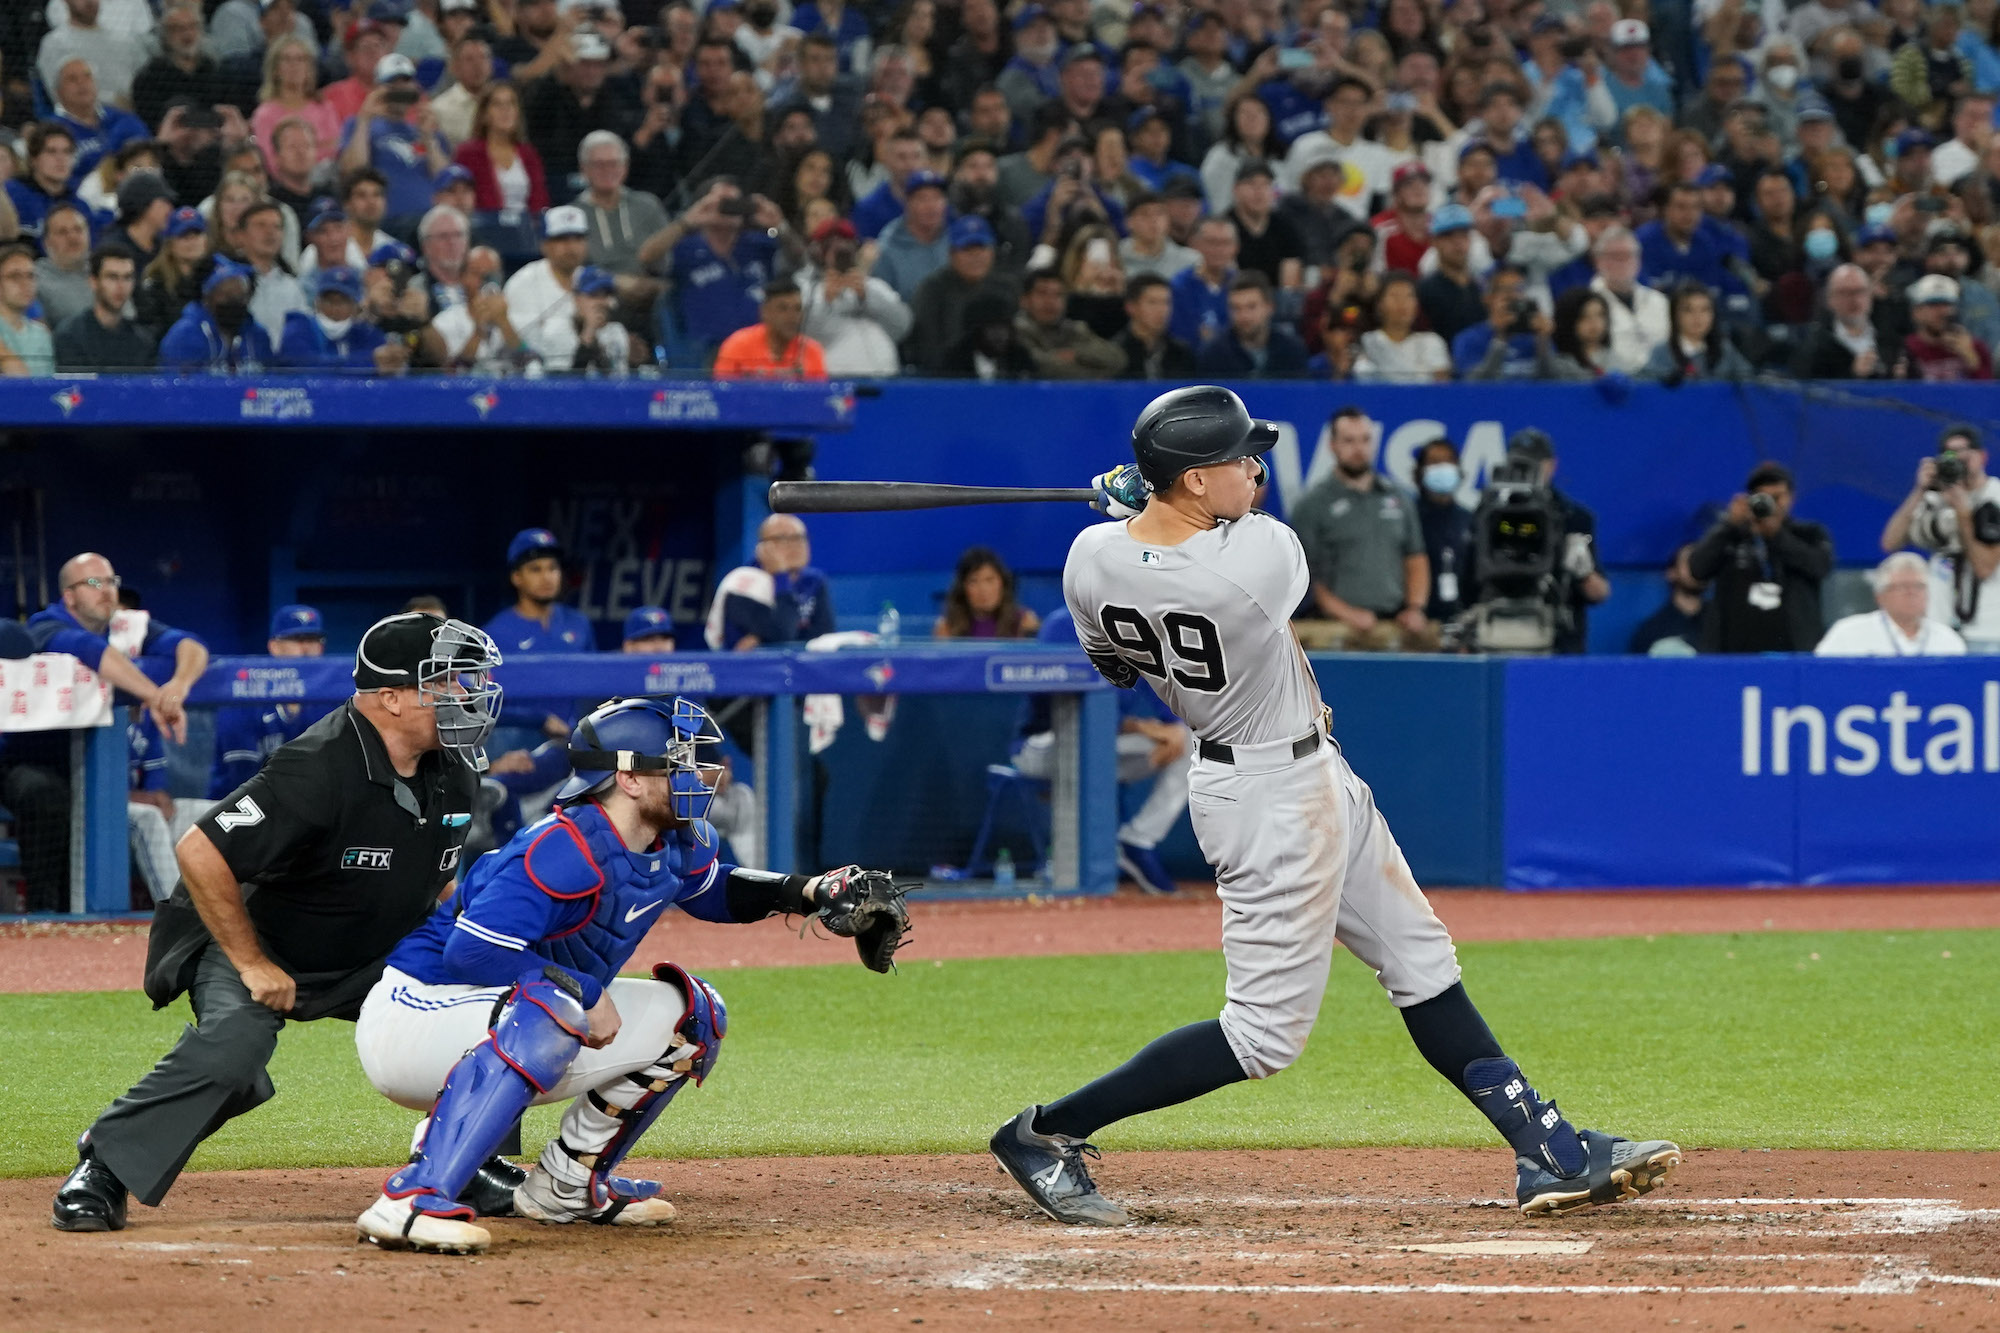 TORONTO, - SEPTEMBER 28: Aaron Judge #99 of the New York Yankees hits a home run in the seventh inning and tying Roger Maris AL record for most home runs in a single season during the game between the New York Yankees and the Toronto Blue Jays at Rogers Centre on Wednesday, September 28, 2022 in Toronto, Canada. (Photo by Thomas Skrlj/MLB Photos via Getty Images)